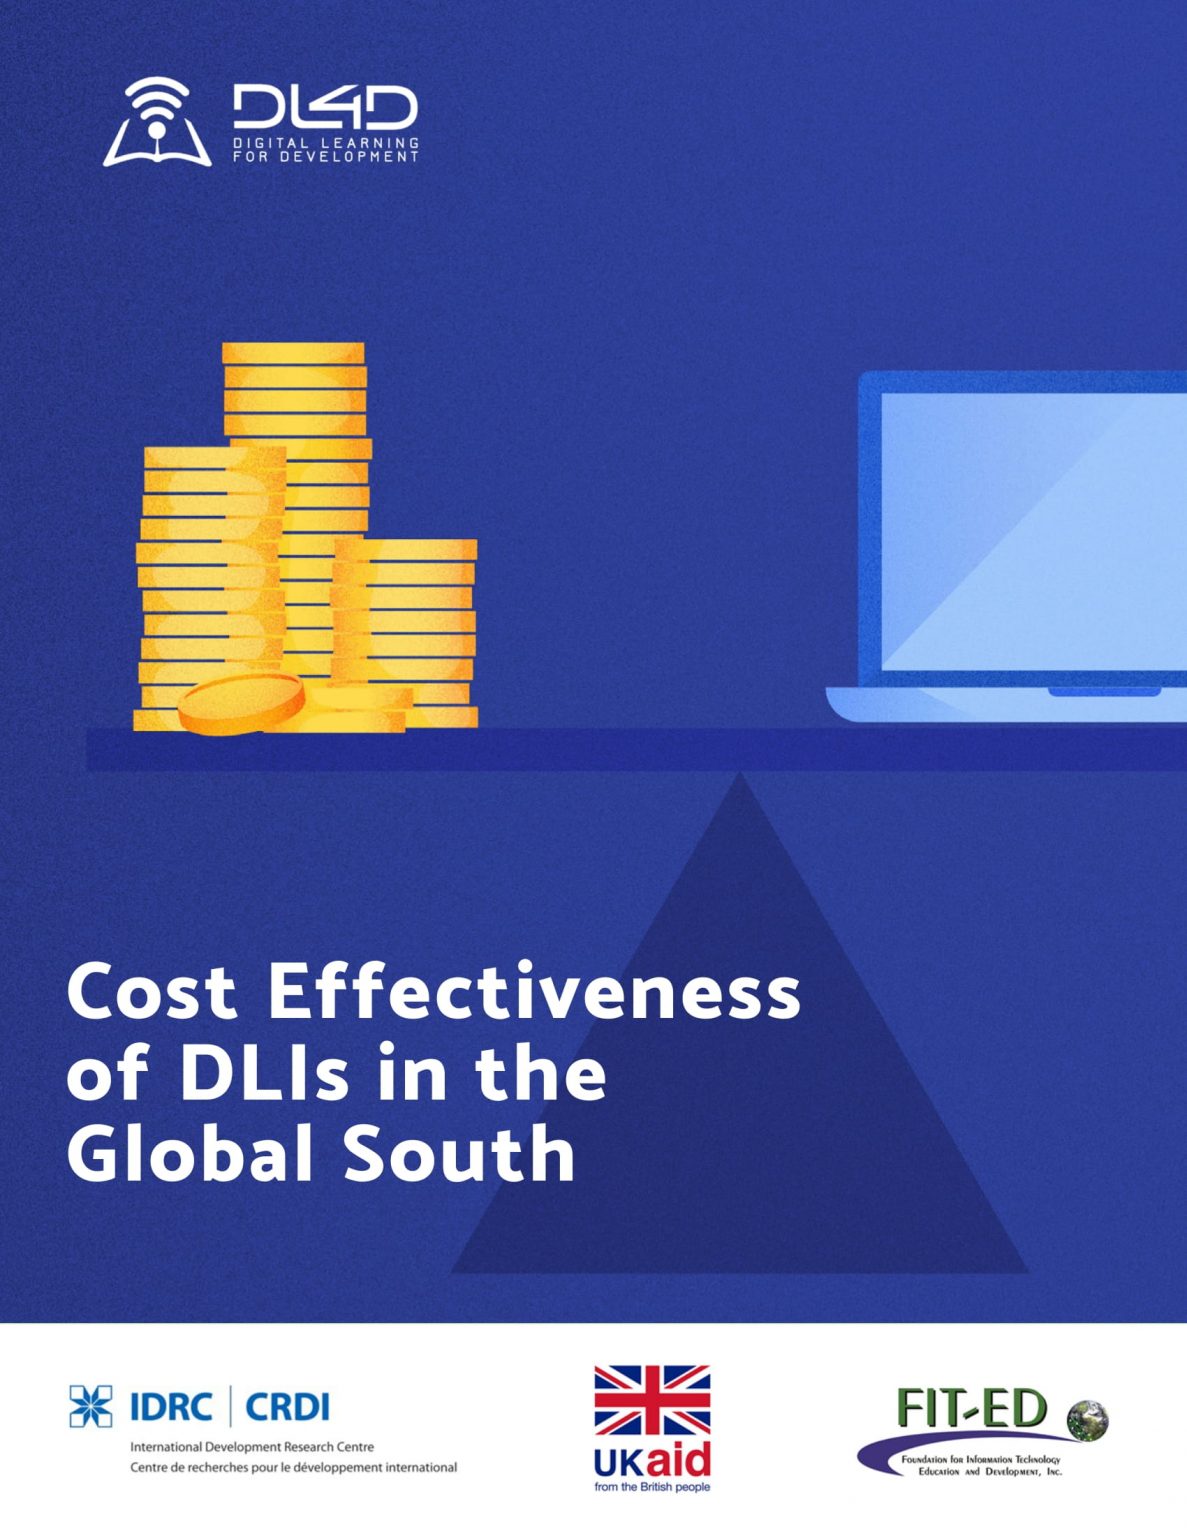 Cost Effectiveness of DLIs in the Global South